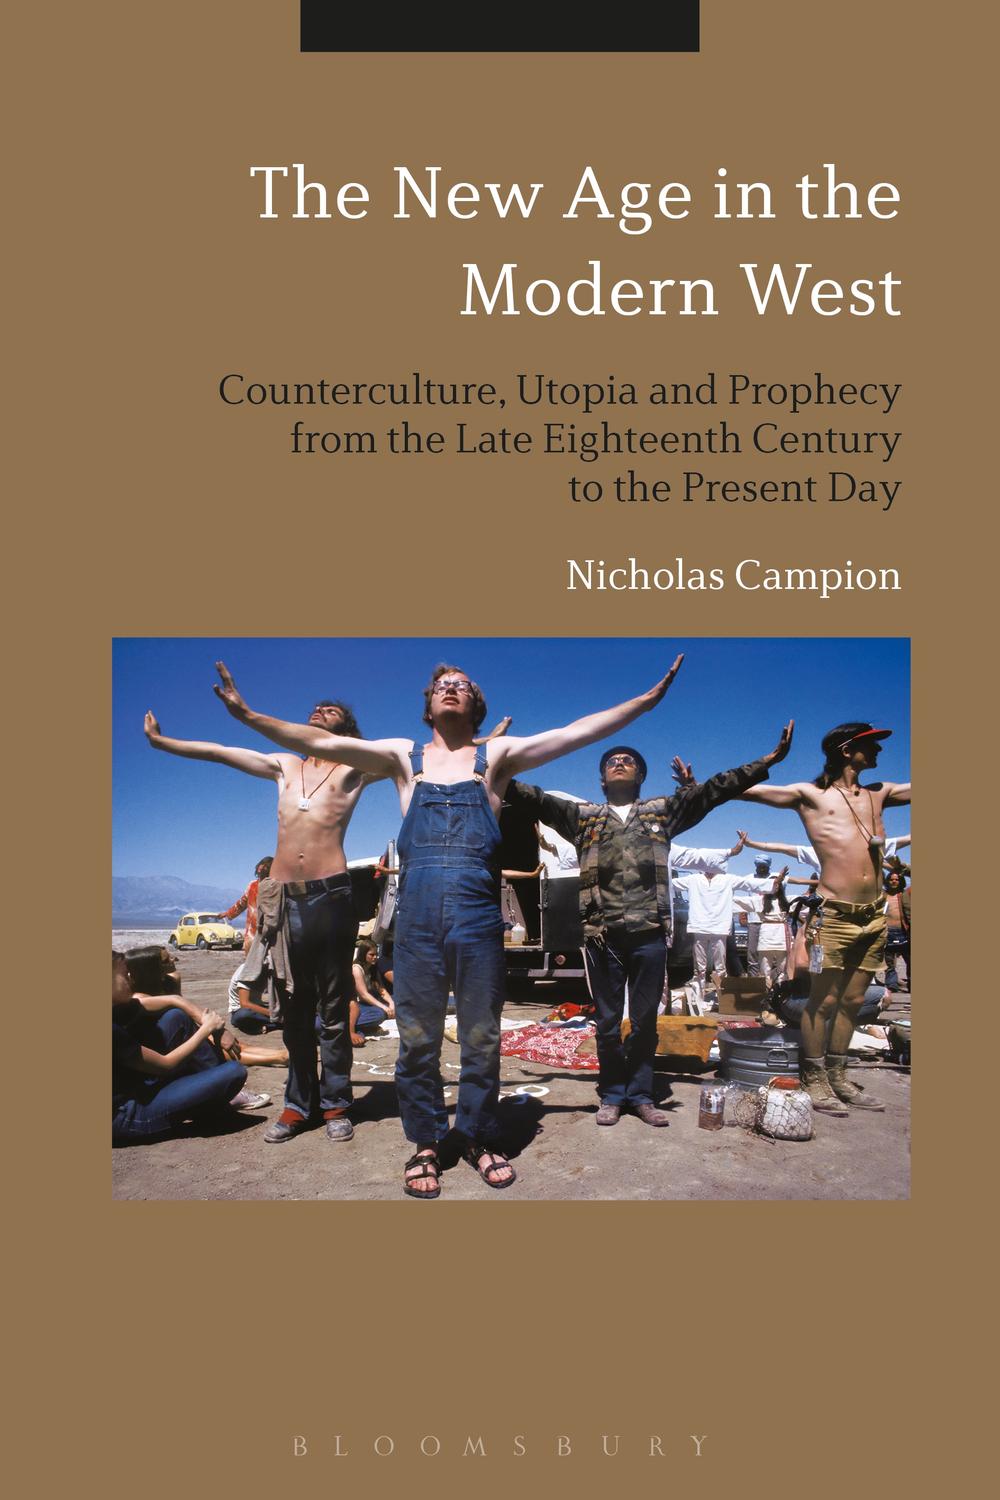 The New Age in the Modern West - Nicholas Campion